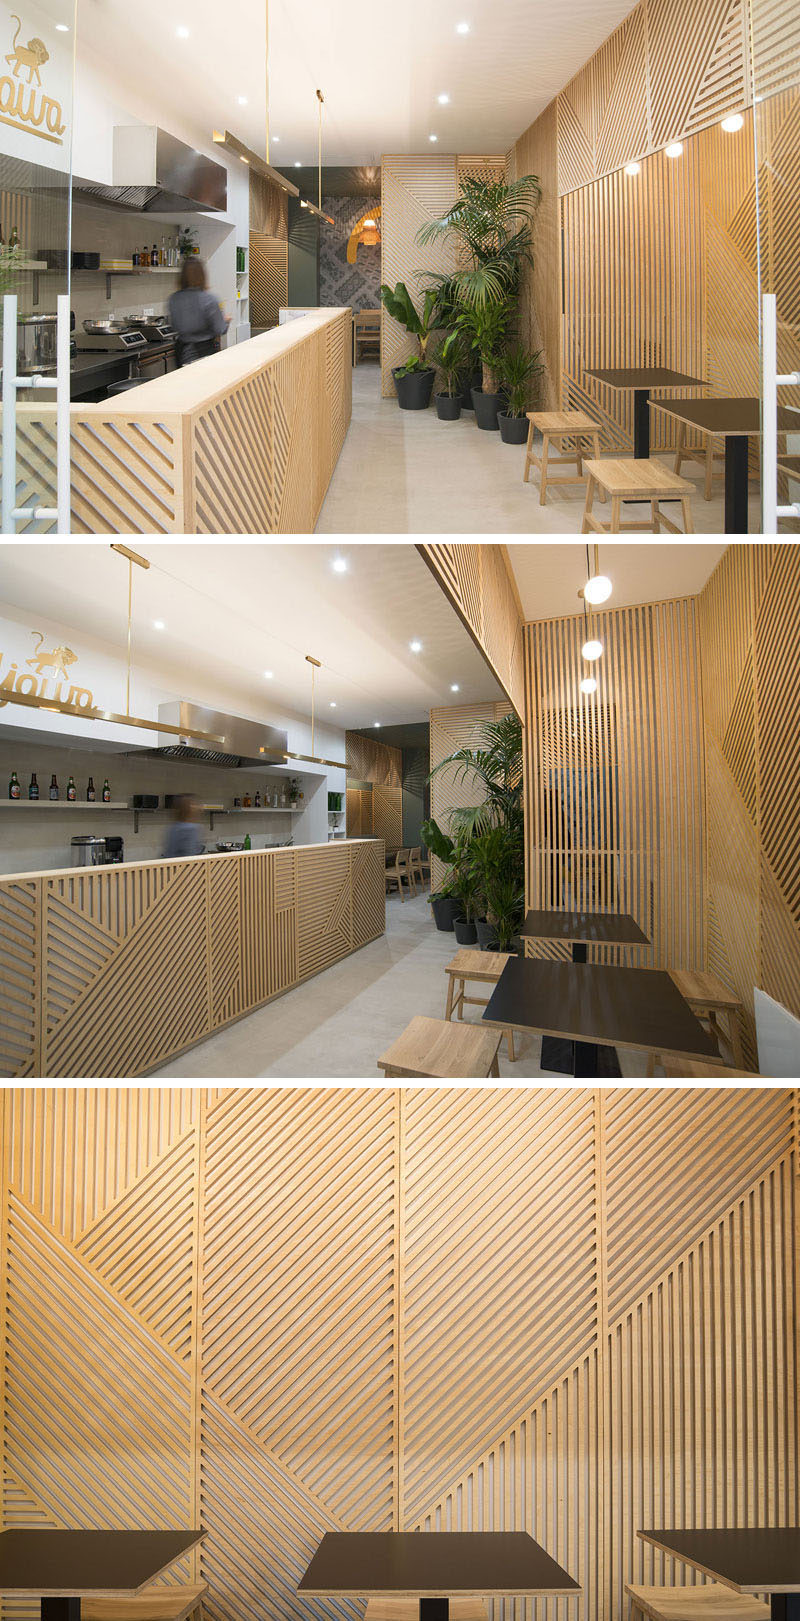 Wall Decor Idea - This restaurant covered its walls with wood panels ...